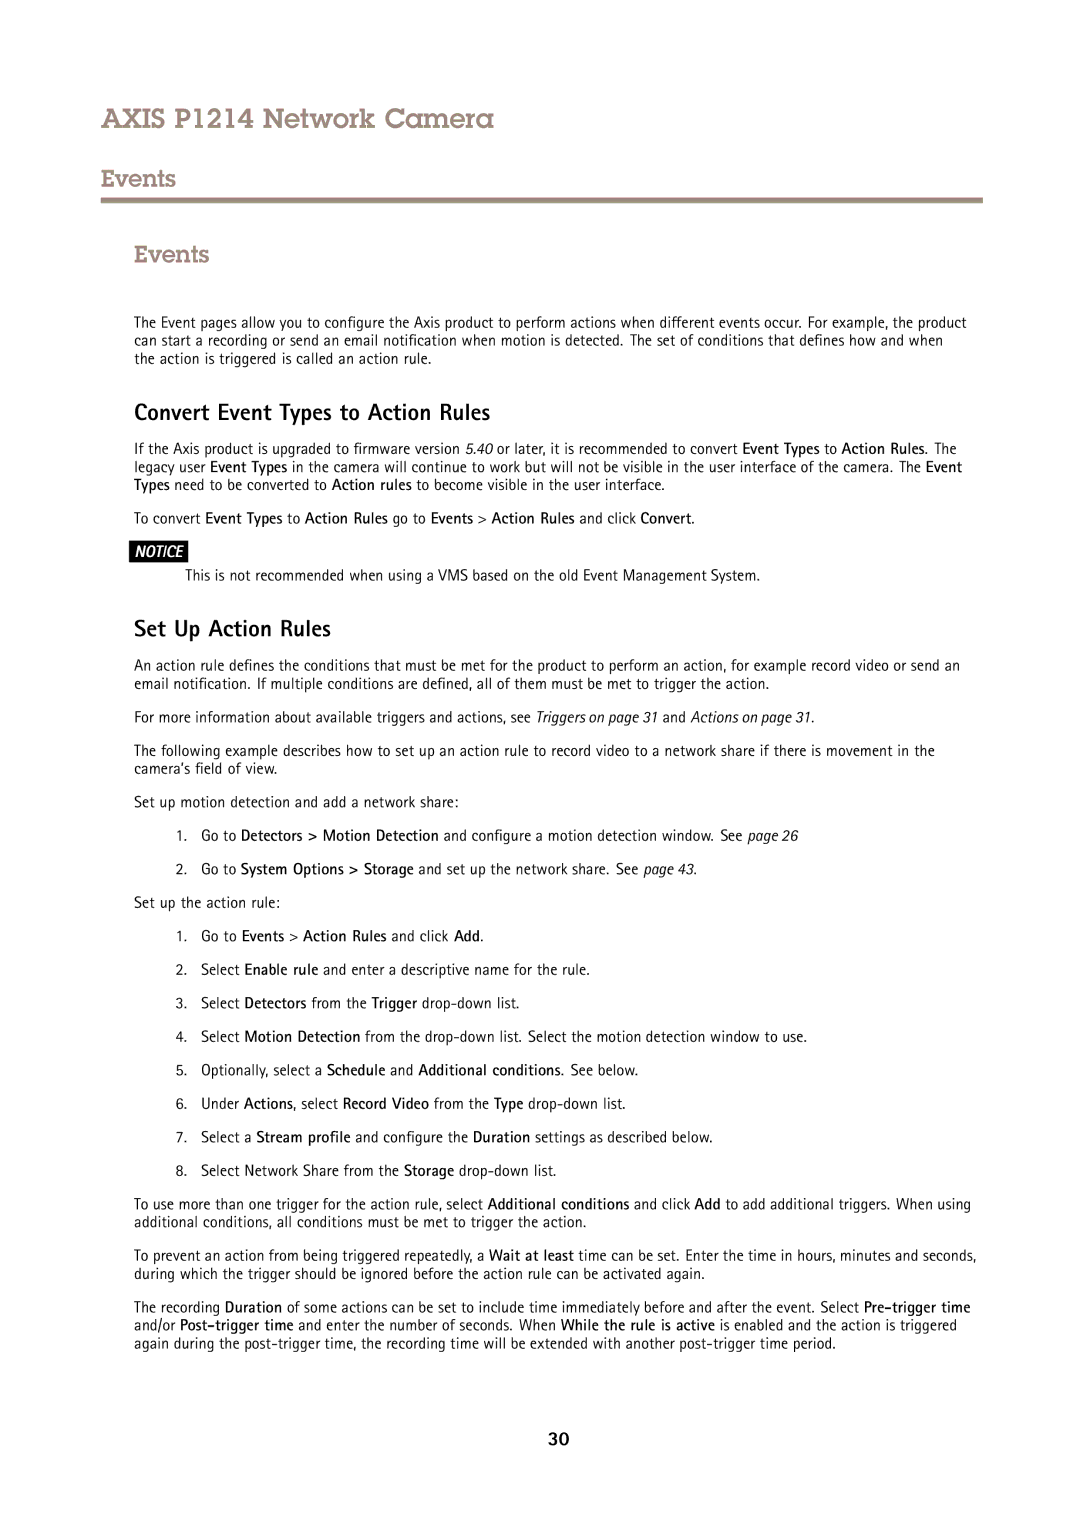 Axis Communications P1214 user manual Events, Convert Event Types to Action Rules, Set Up Action Rules 